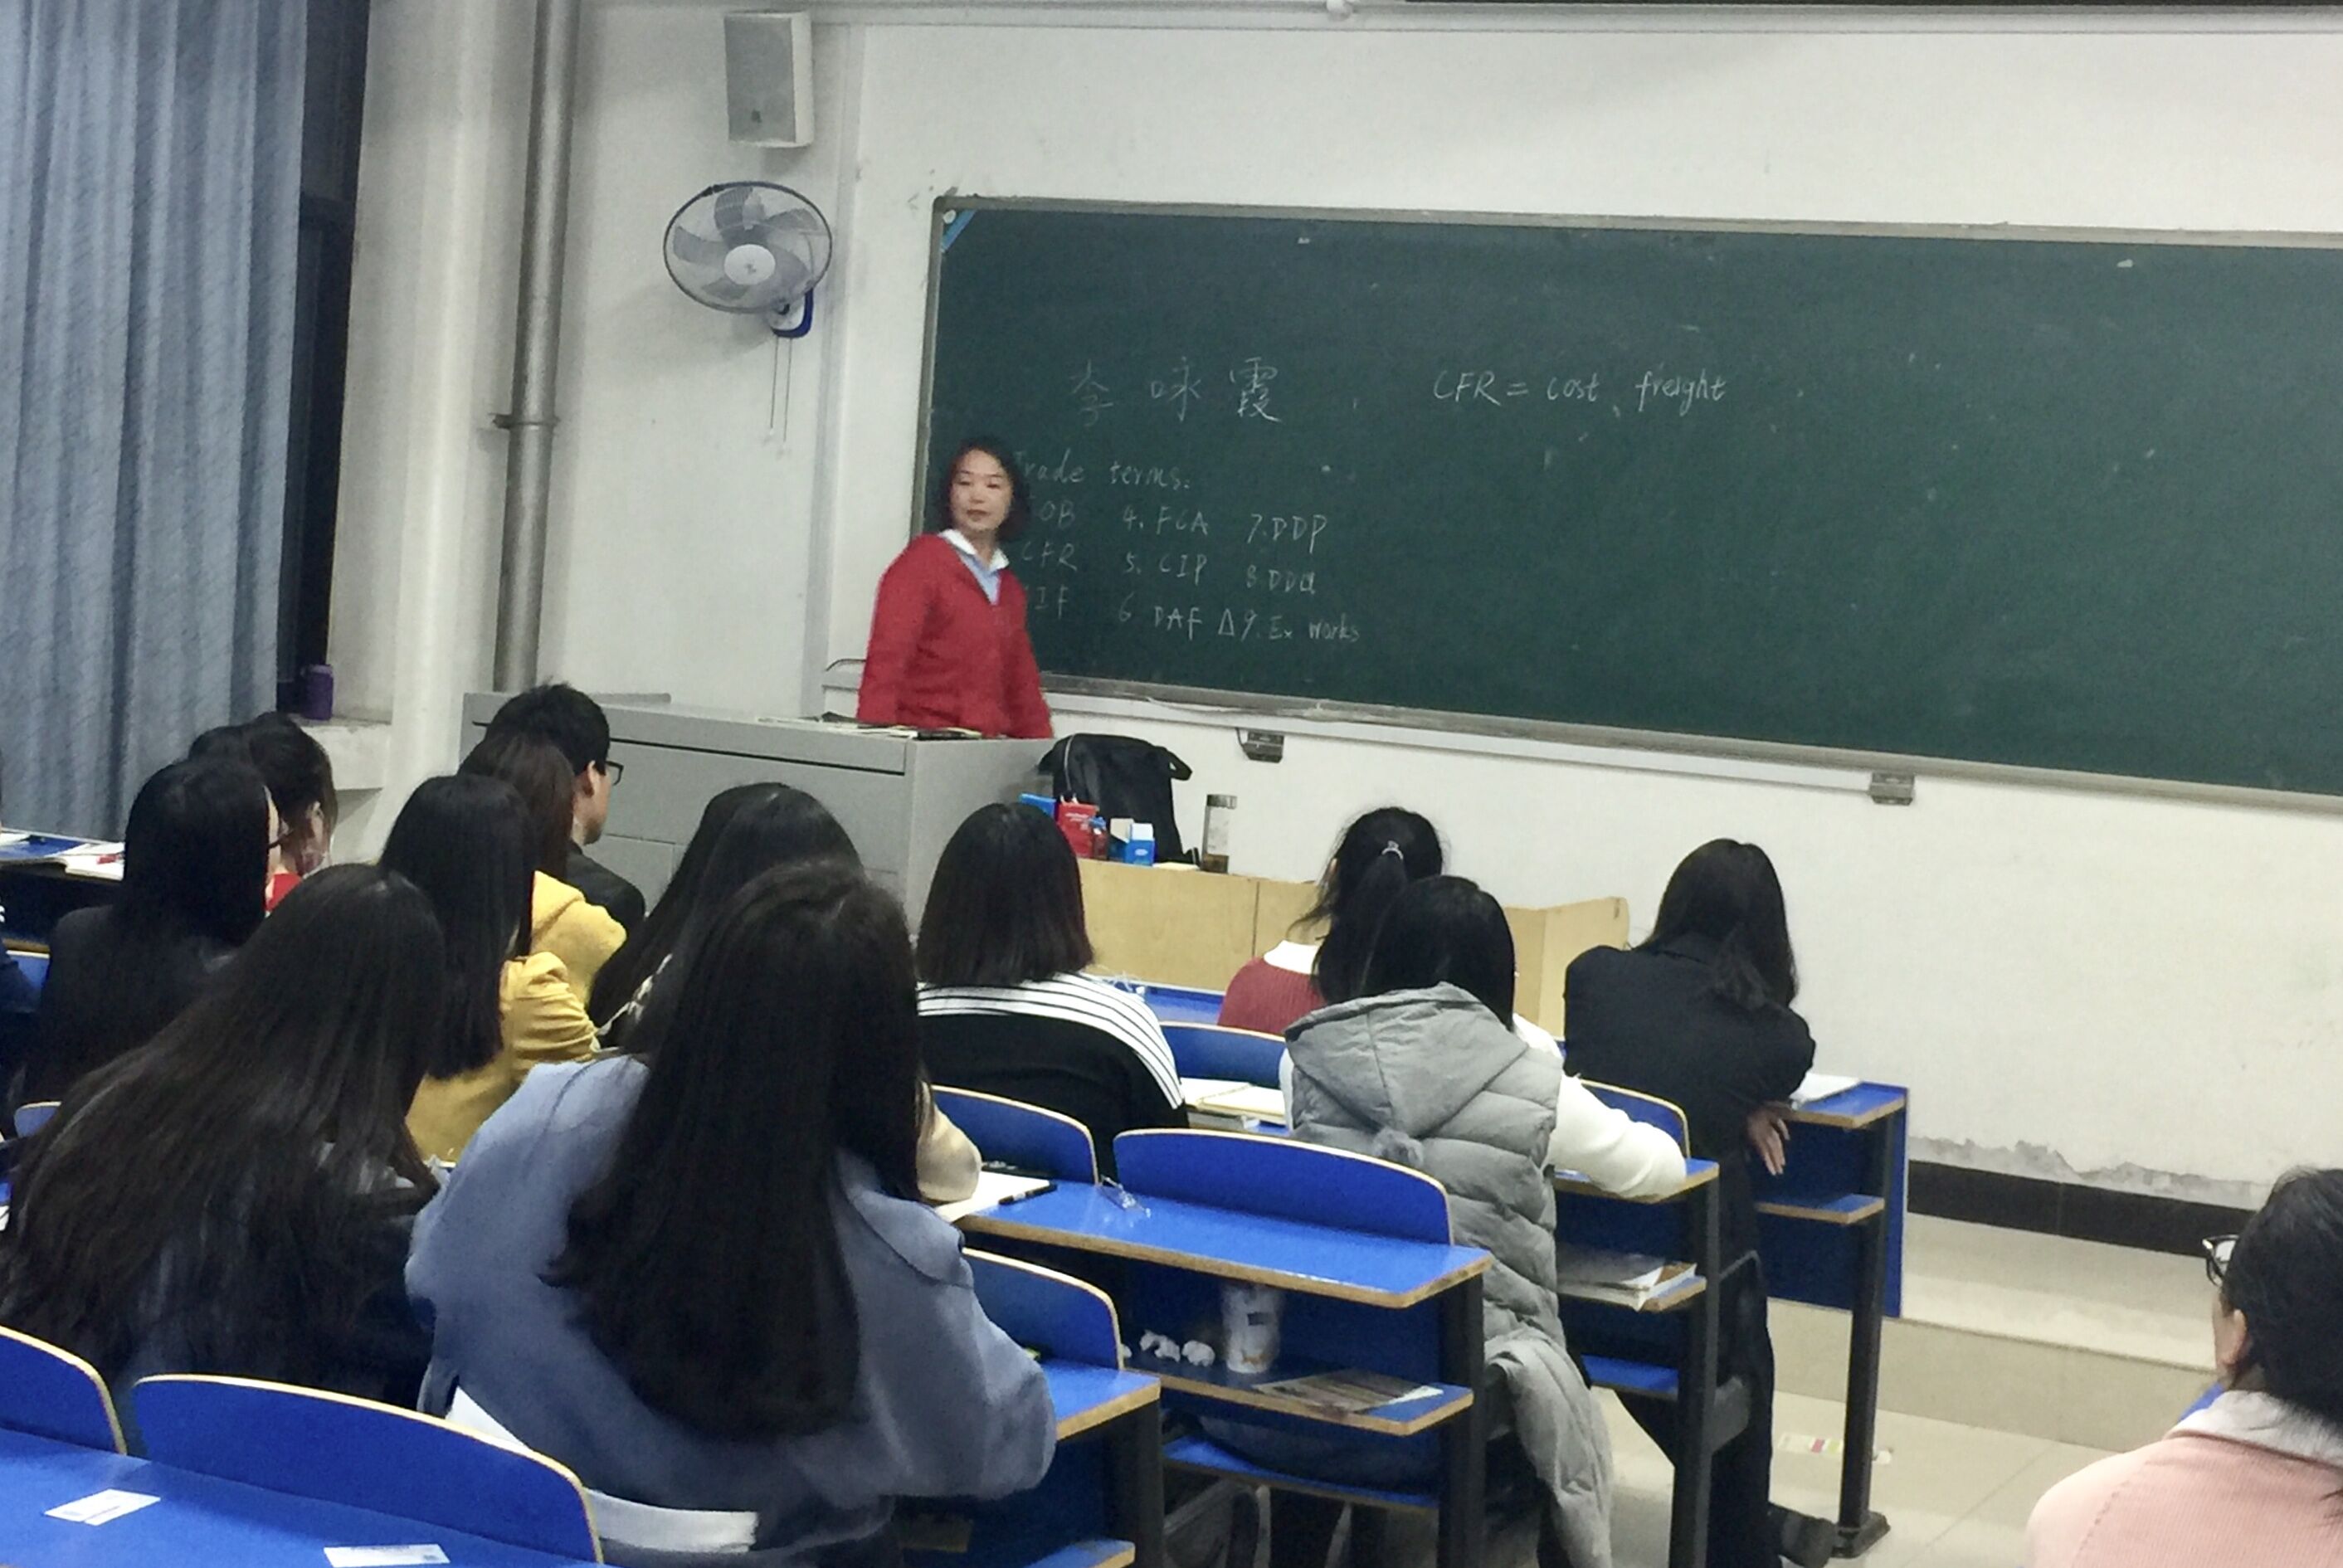 Congratulations to XINLI FILTER TECHNOLOGY CO.,LTD for the successful conclusion of the university lecture